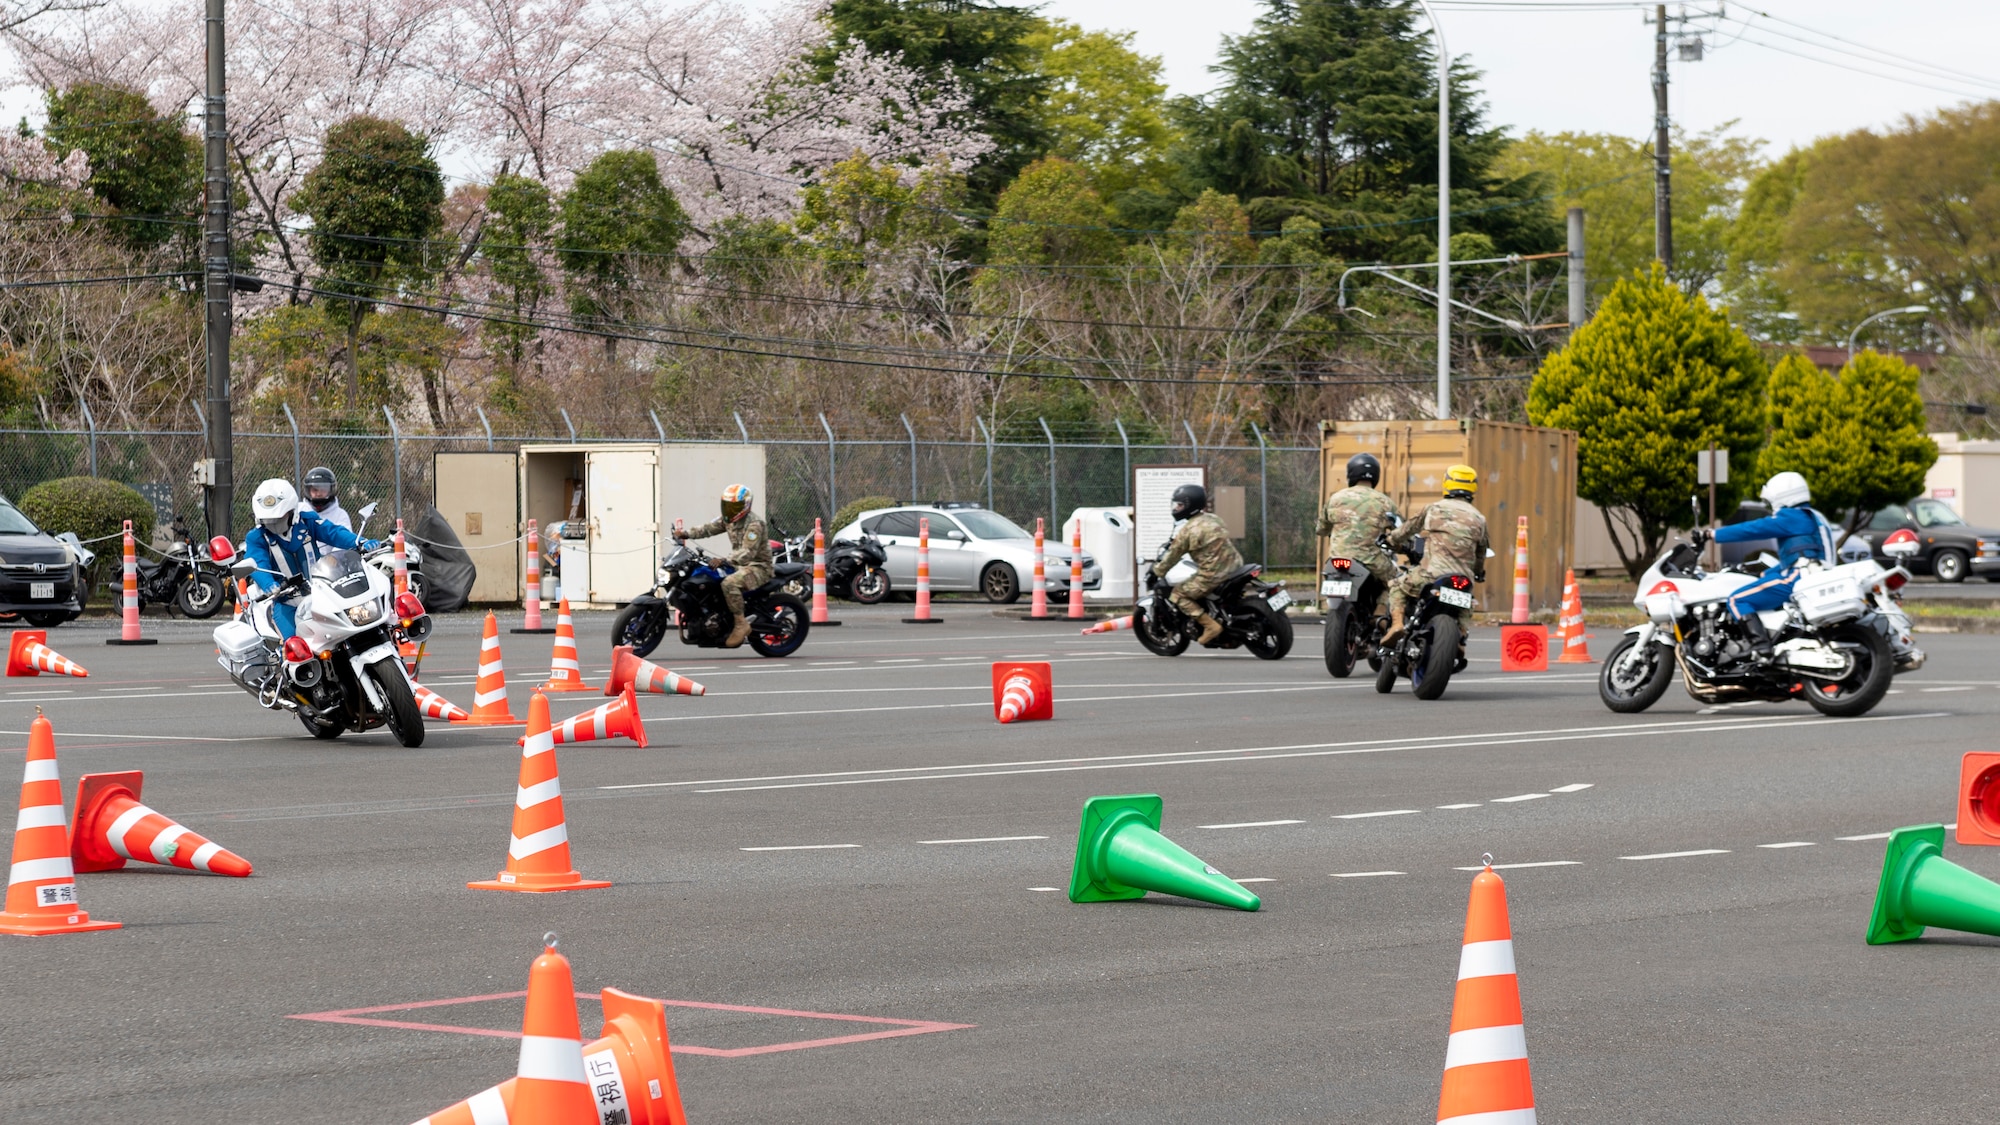 Several motorcycle riders weave through a path of cones in a parking lot